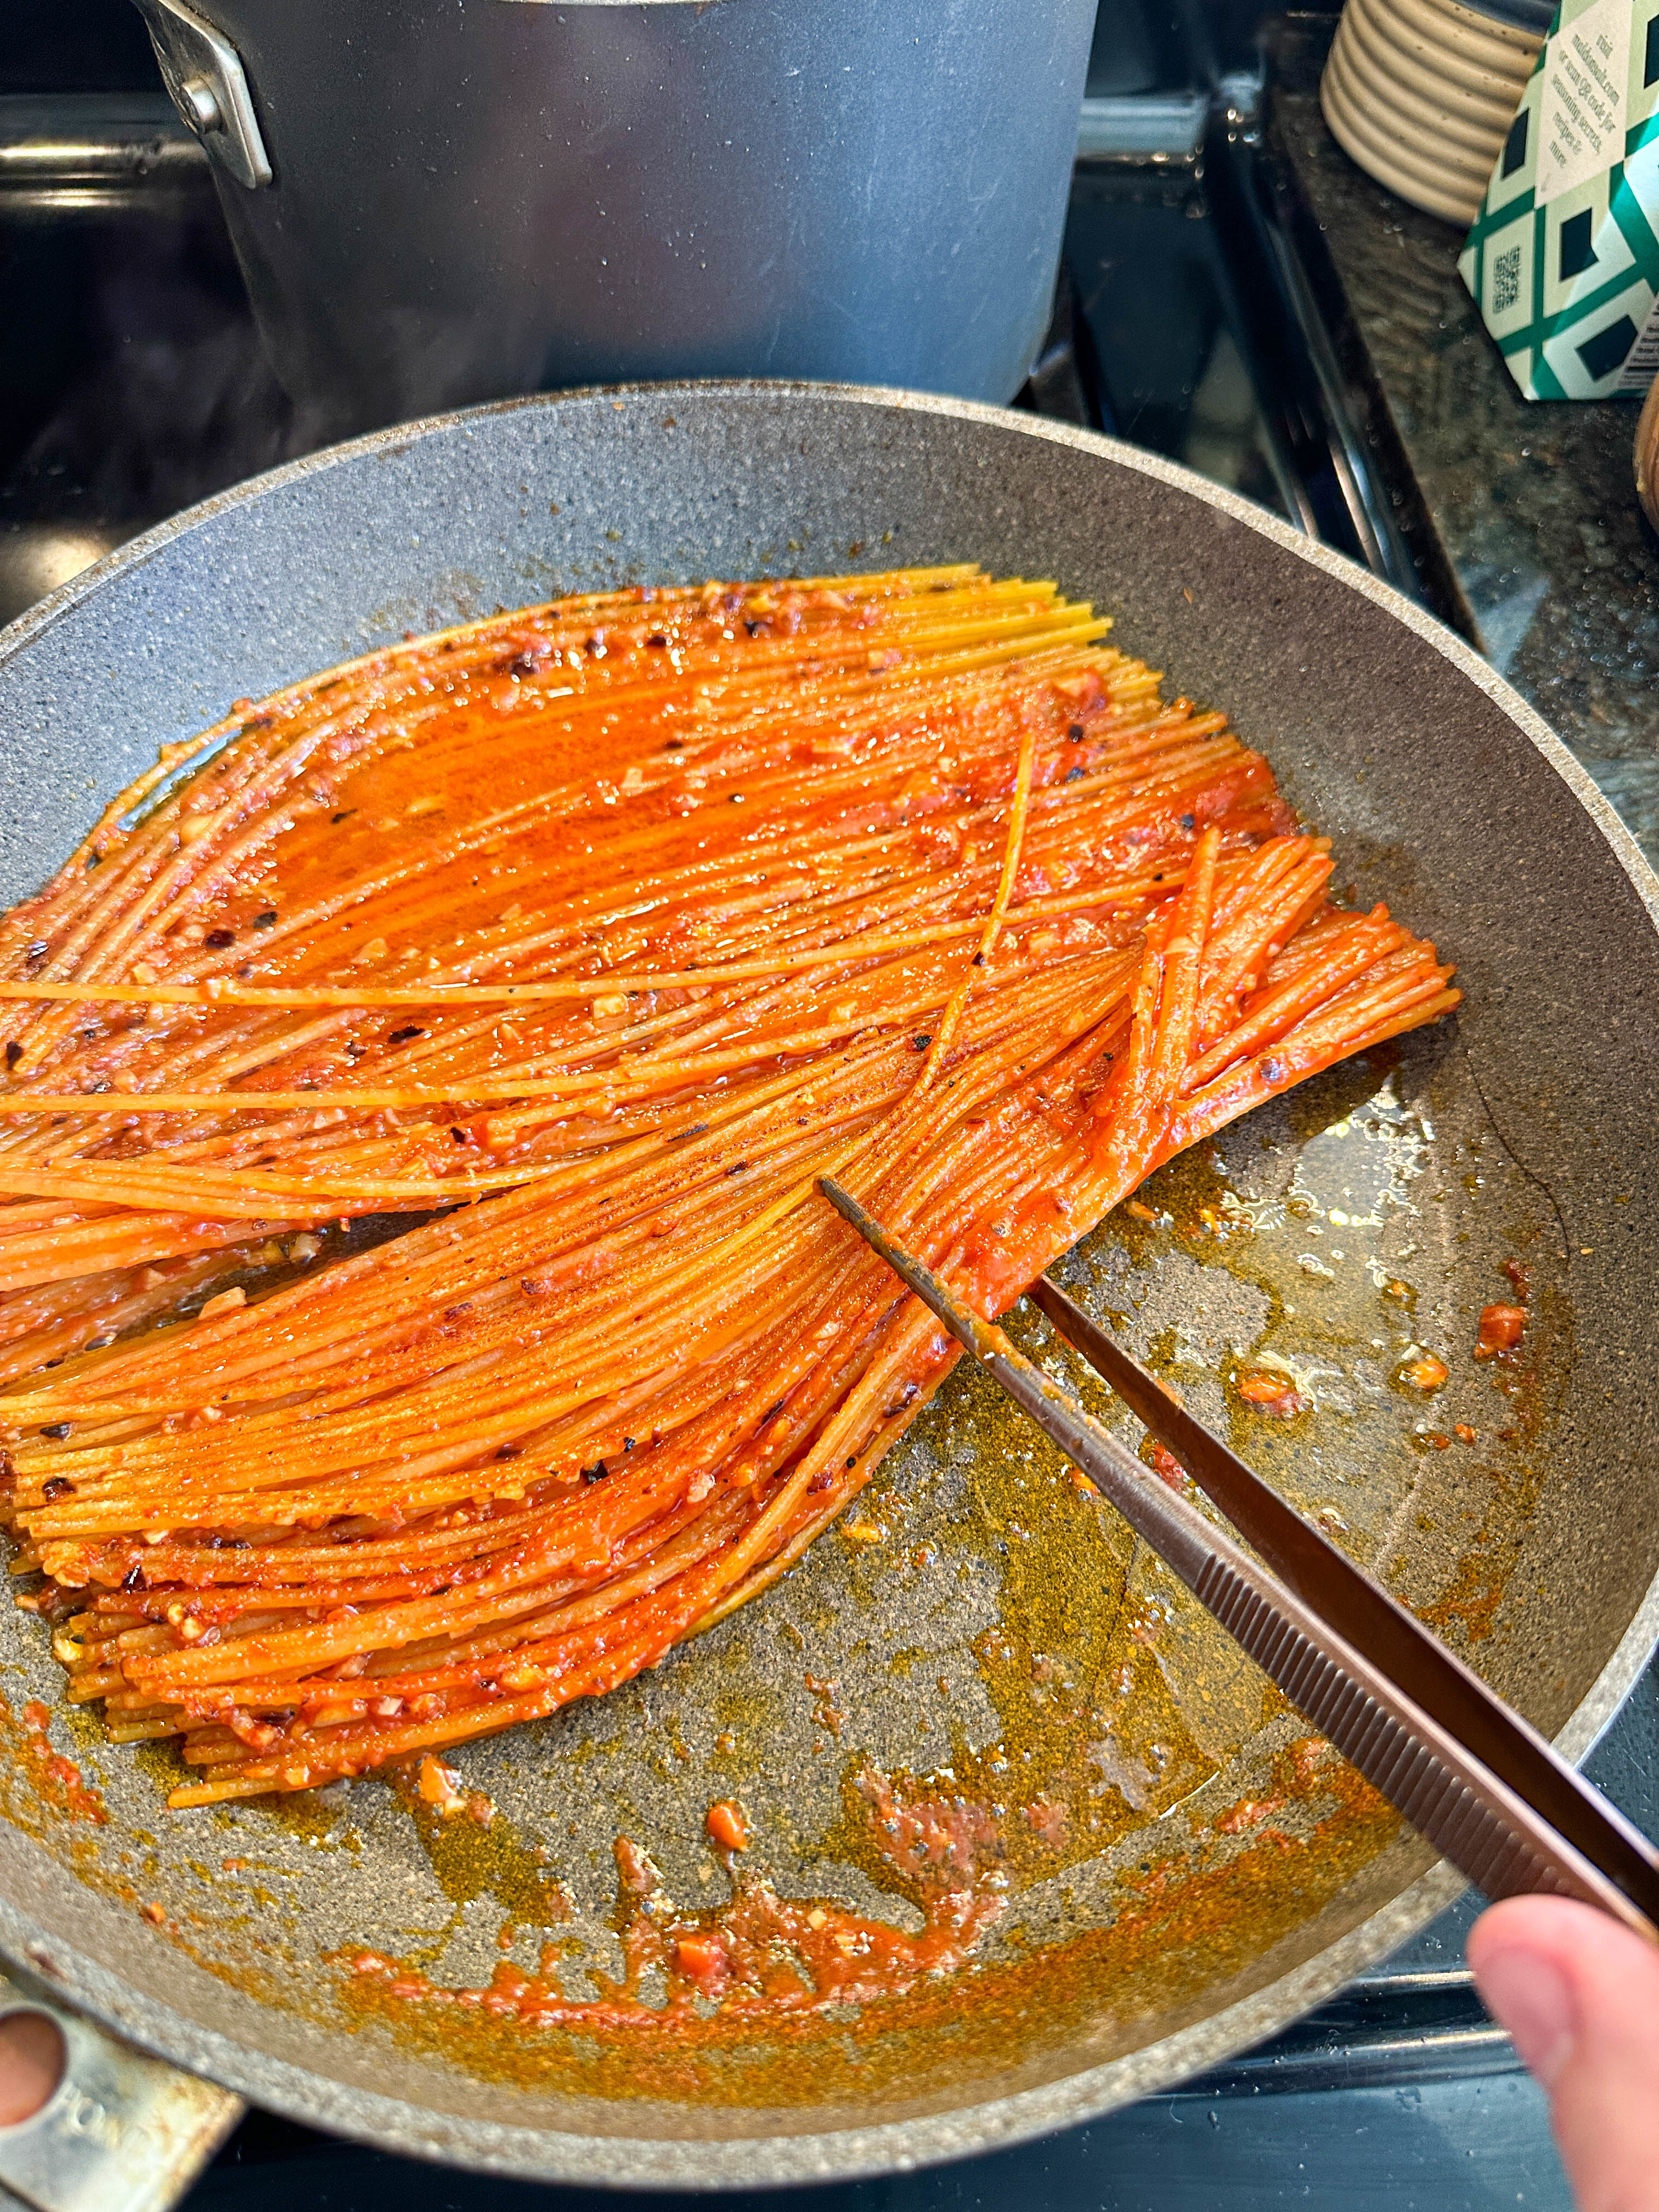 Spaghetti being flipped in a pan with tomato sauce, hand holding tongs